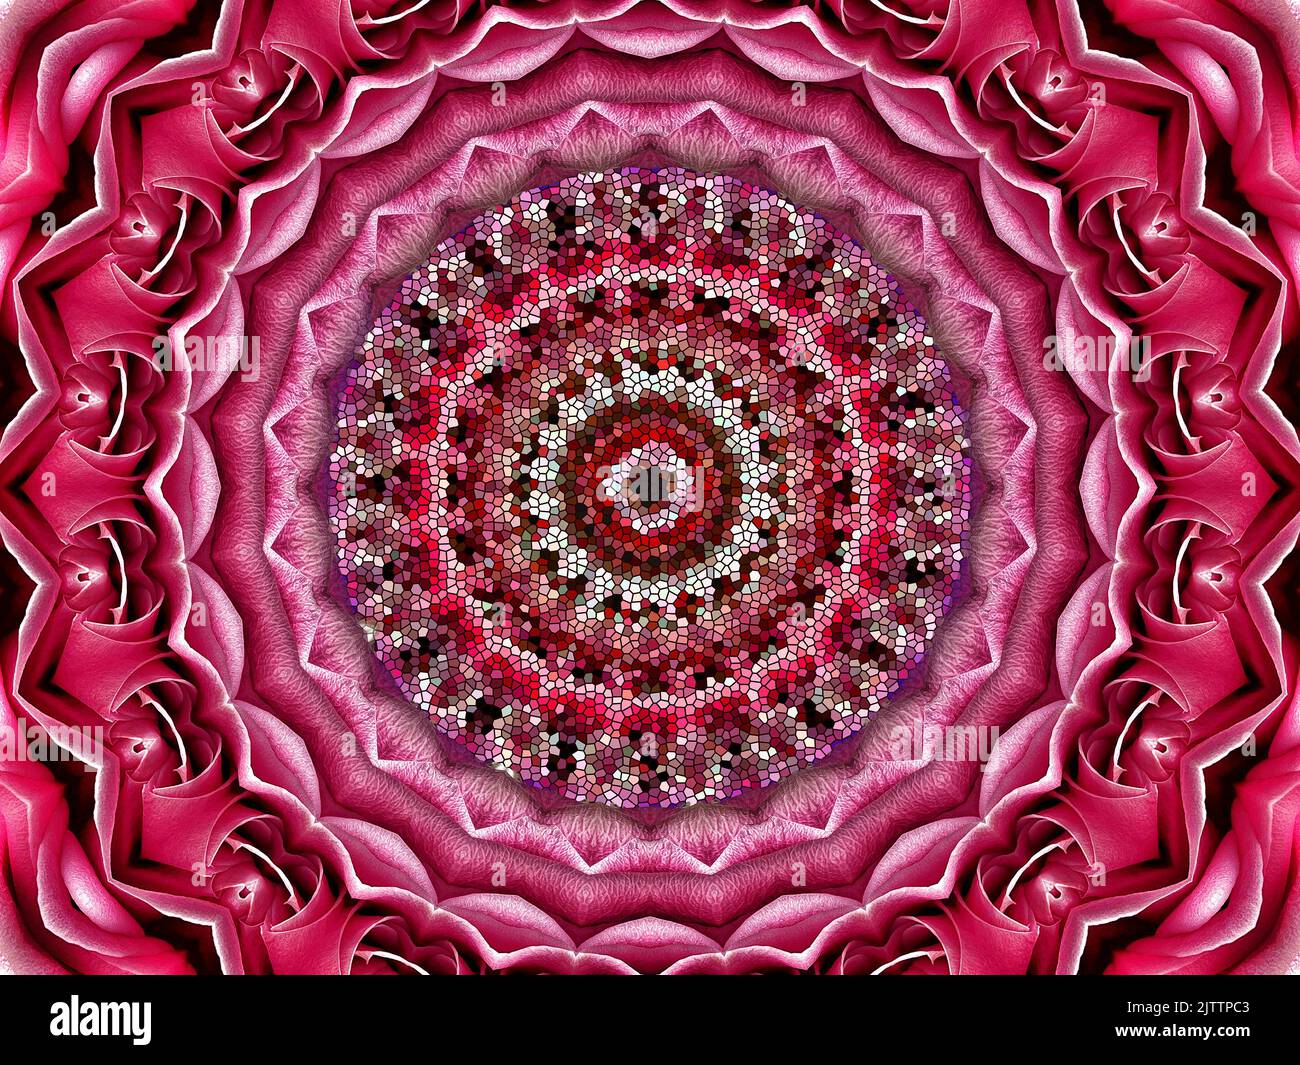 Graphic kaleidoscope  geometric and concentric design with a mosaic center. Stock Photo